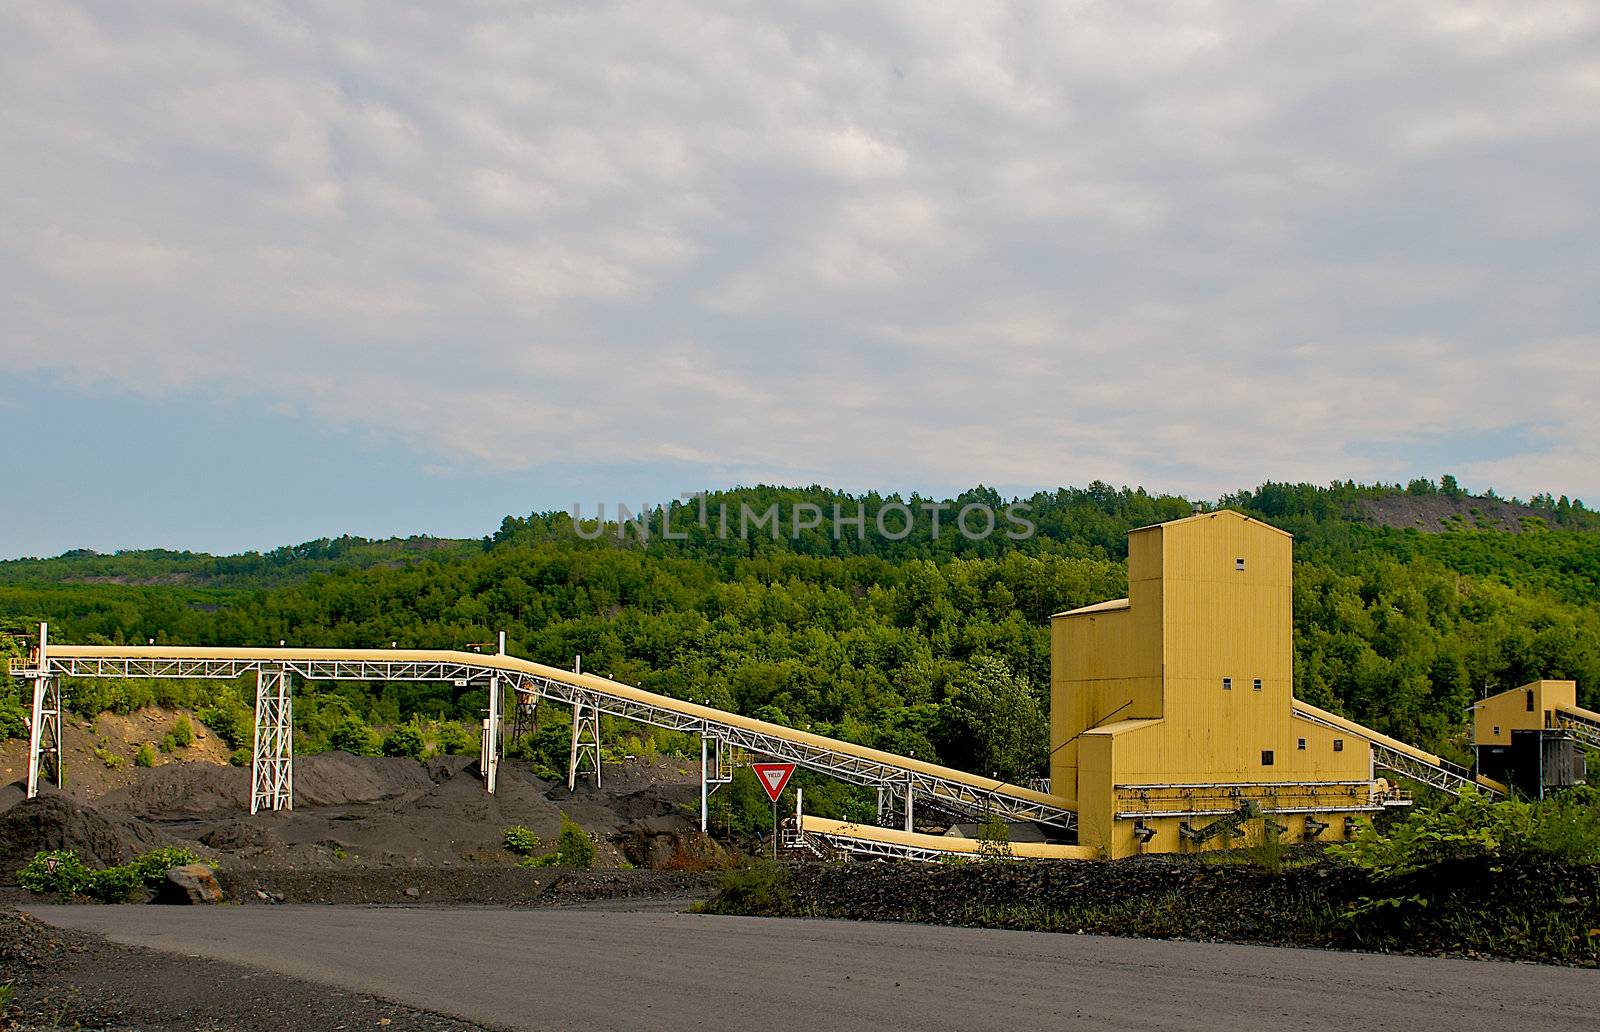 Industrial image of a coal mine breaker plant for anthracite coal
production.